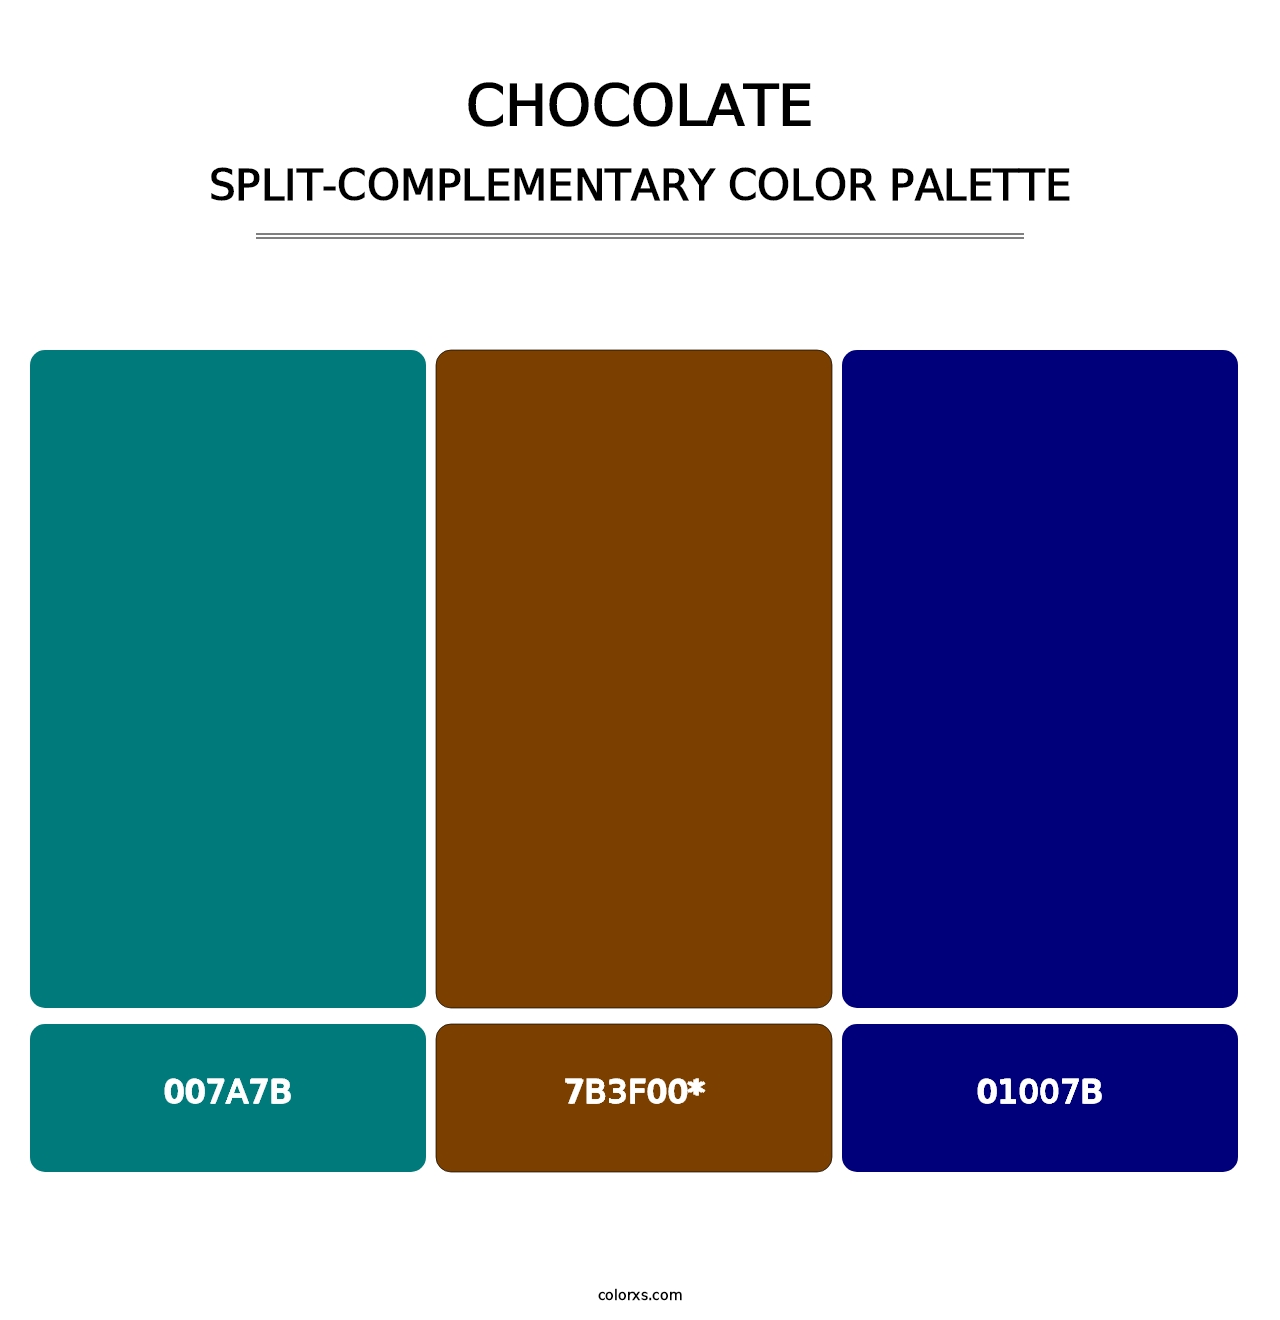 Chocolate - Split-Complementary Color Palette